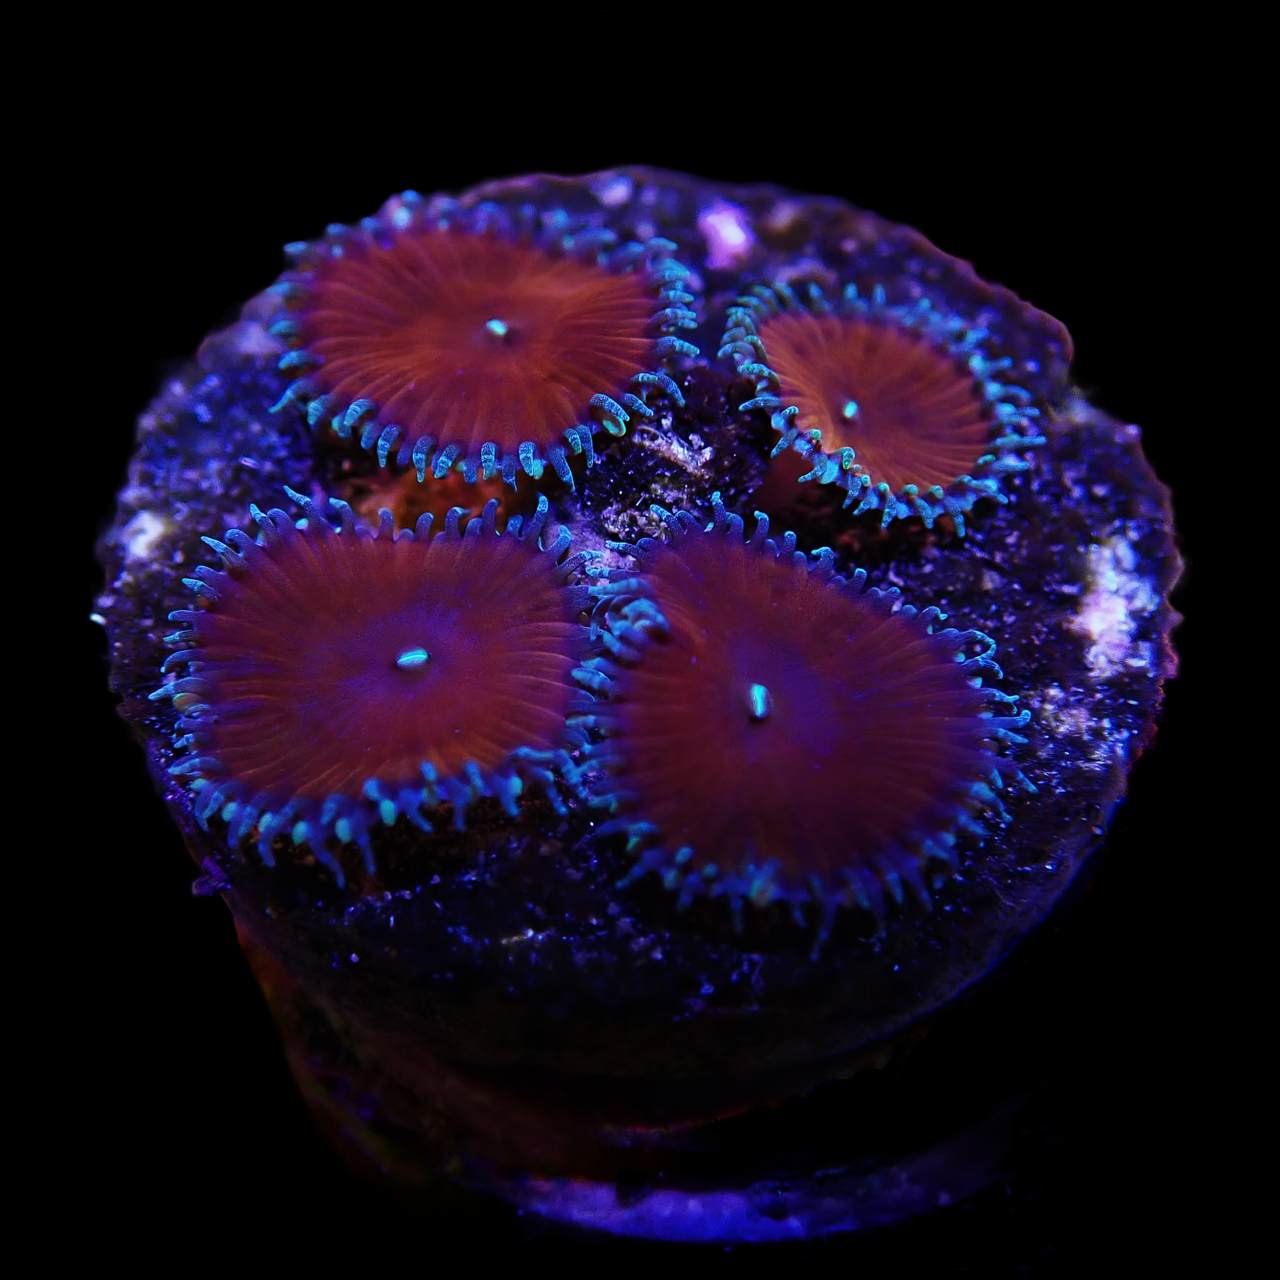 17 RED DEATH ZOAS